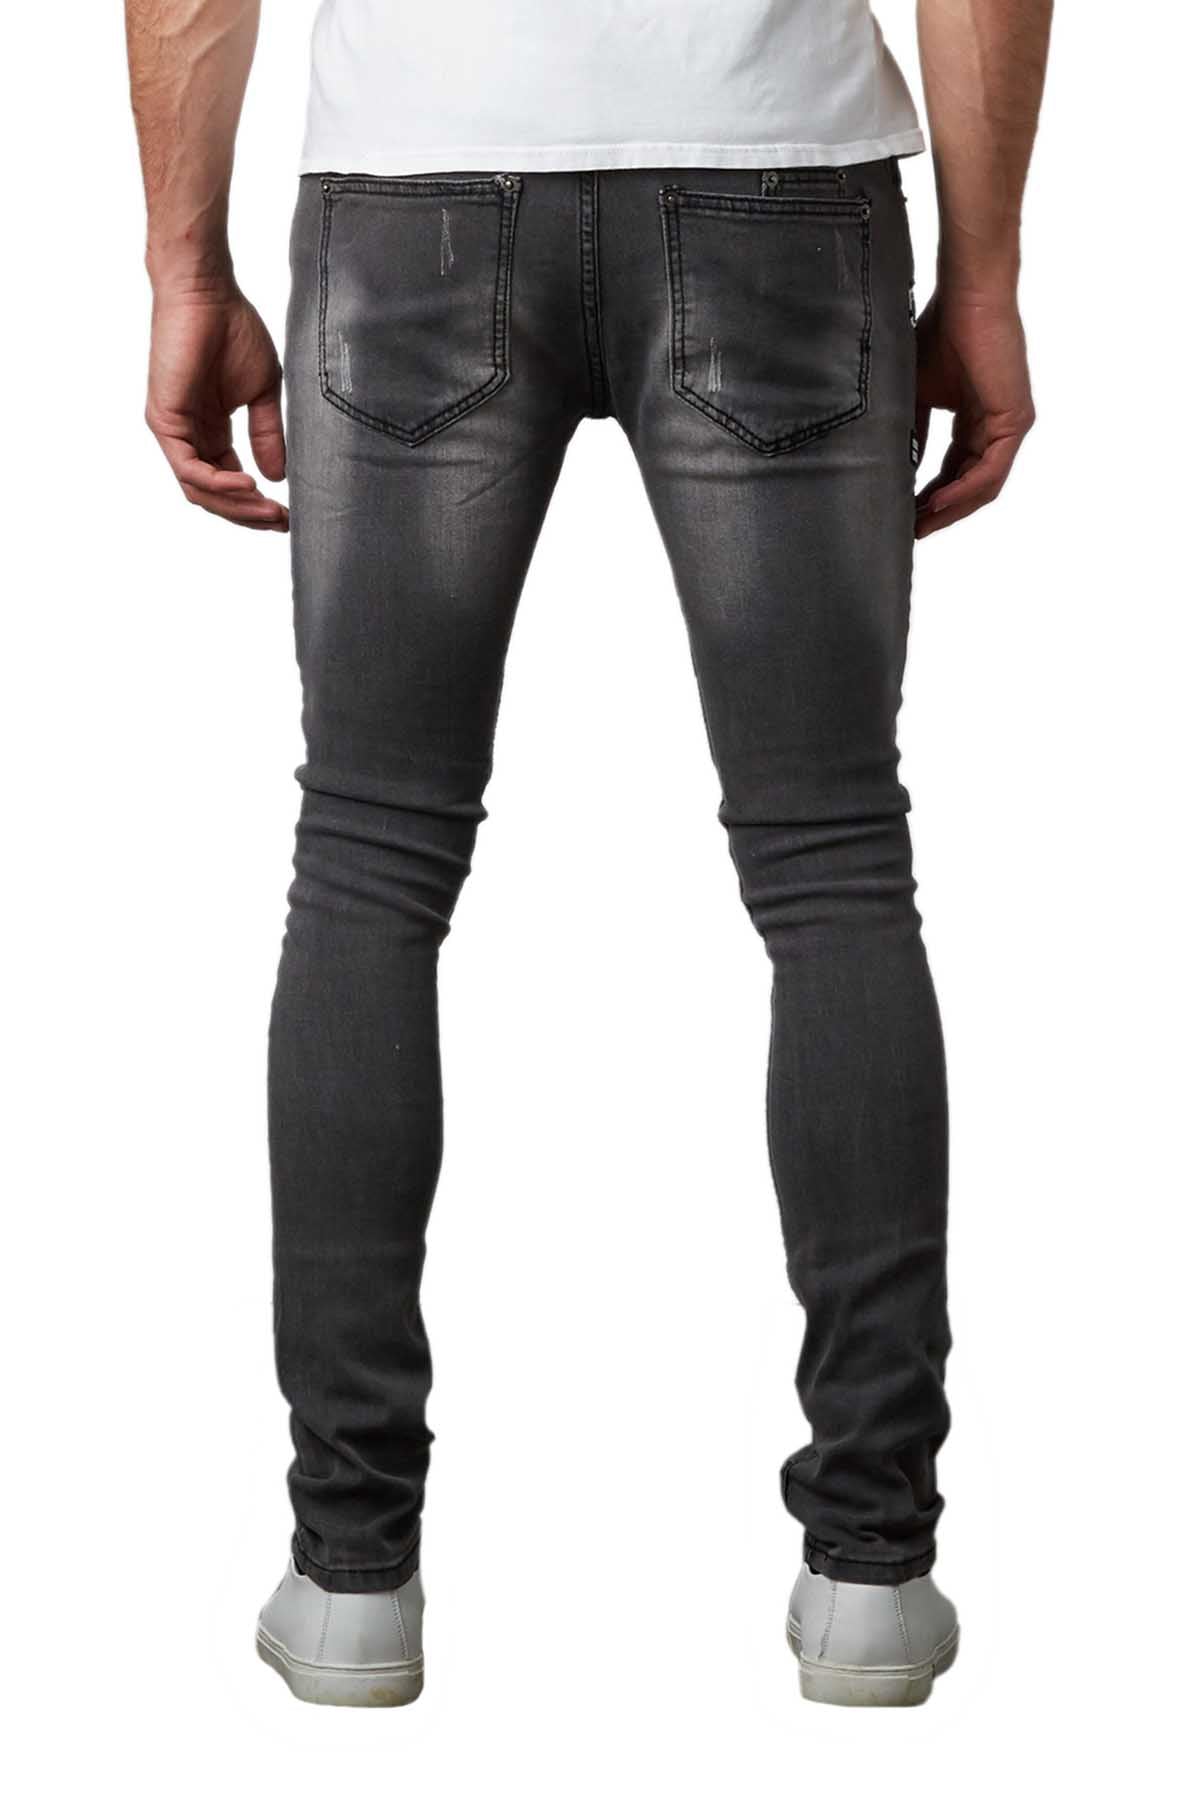 Tailored Recreation Premium Grey Distressed & Patched Tapered Denim Pant